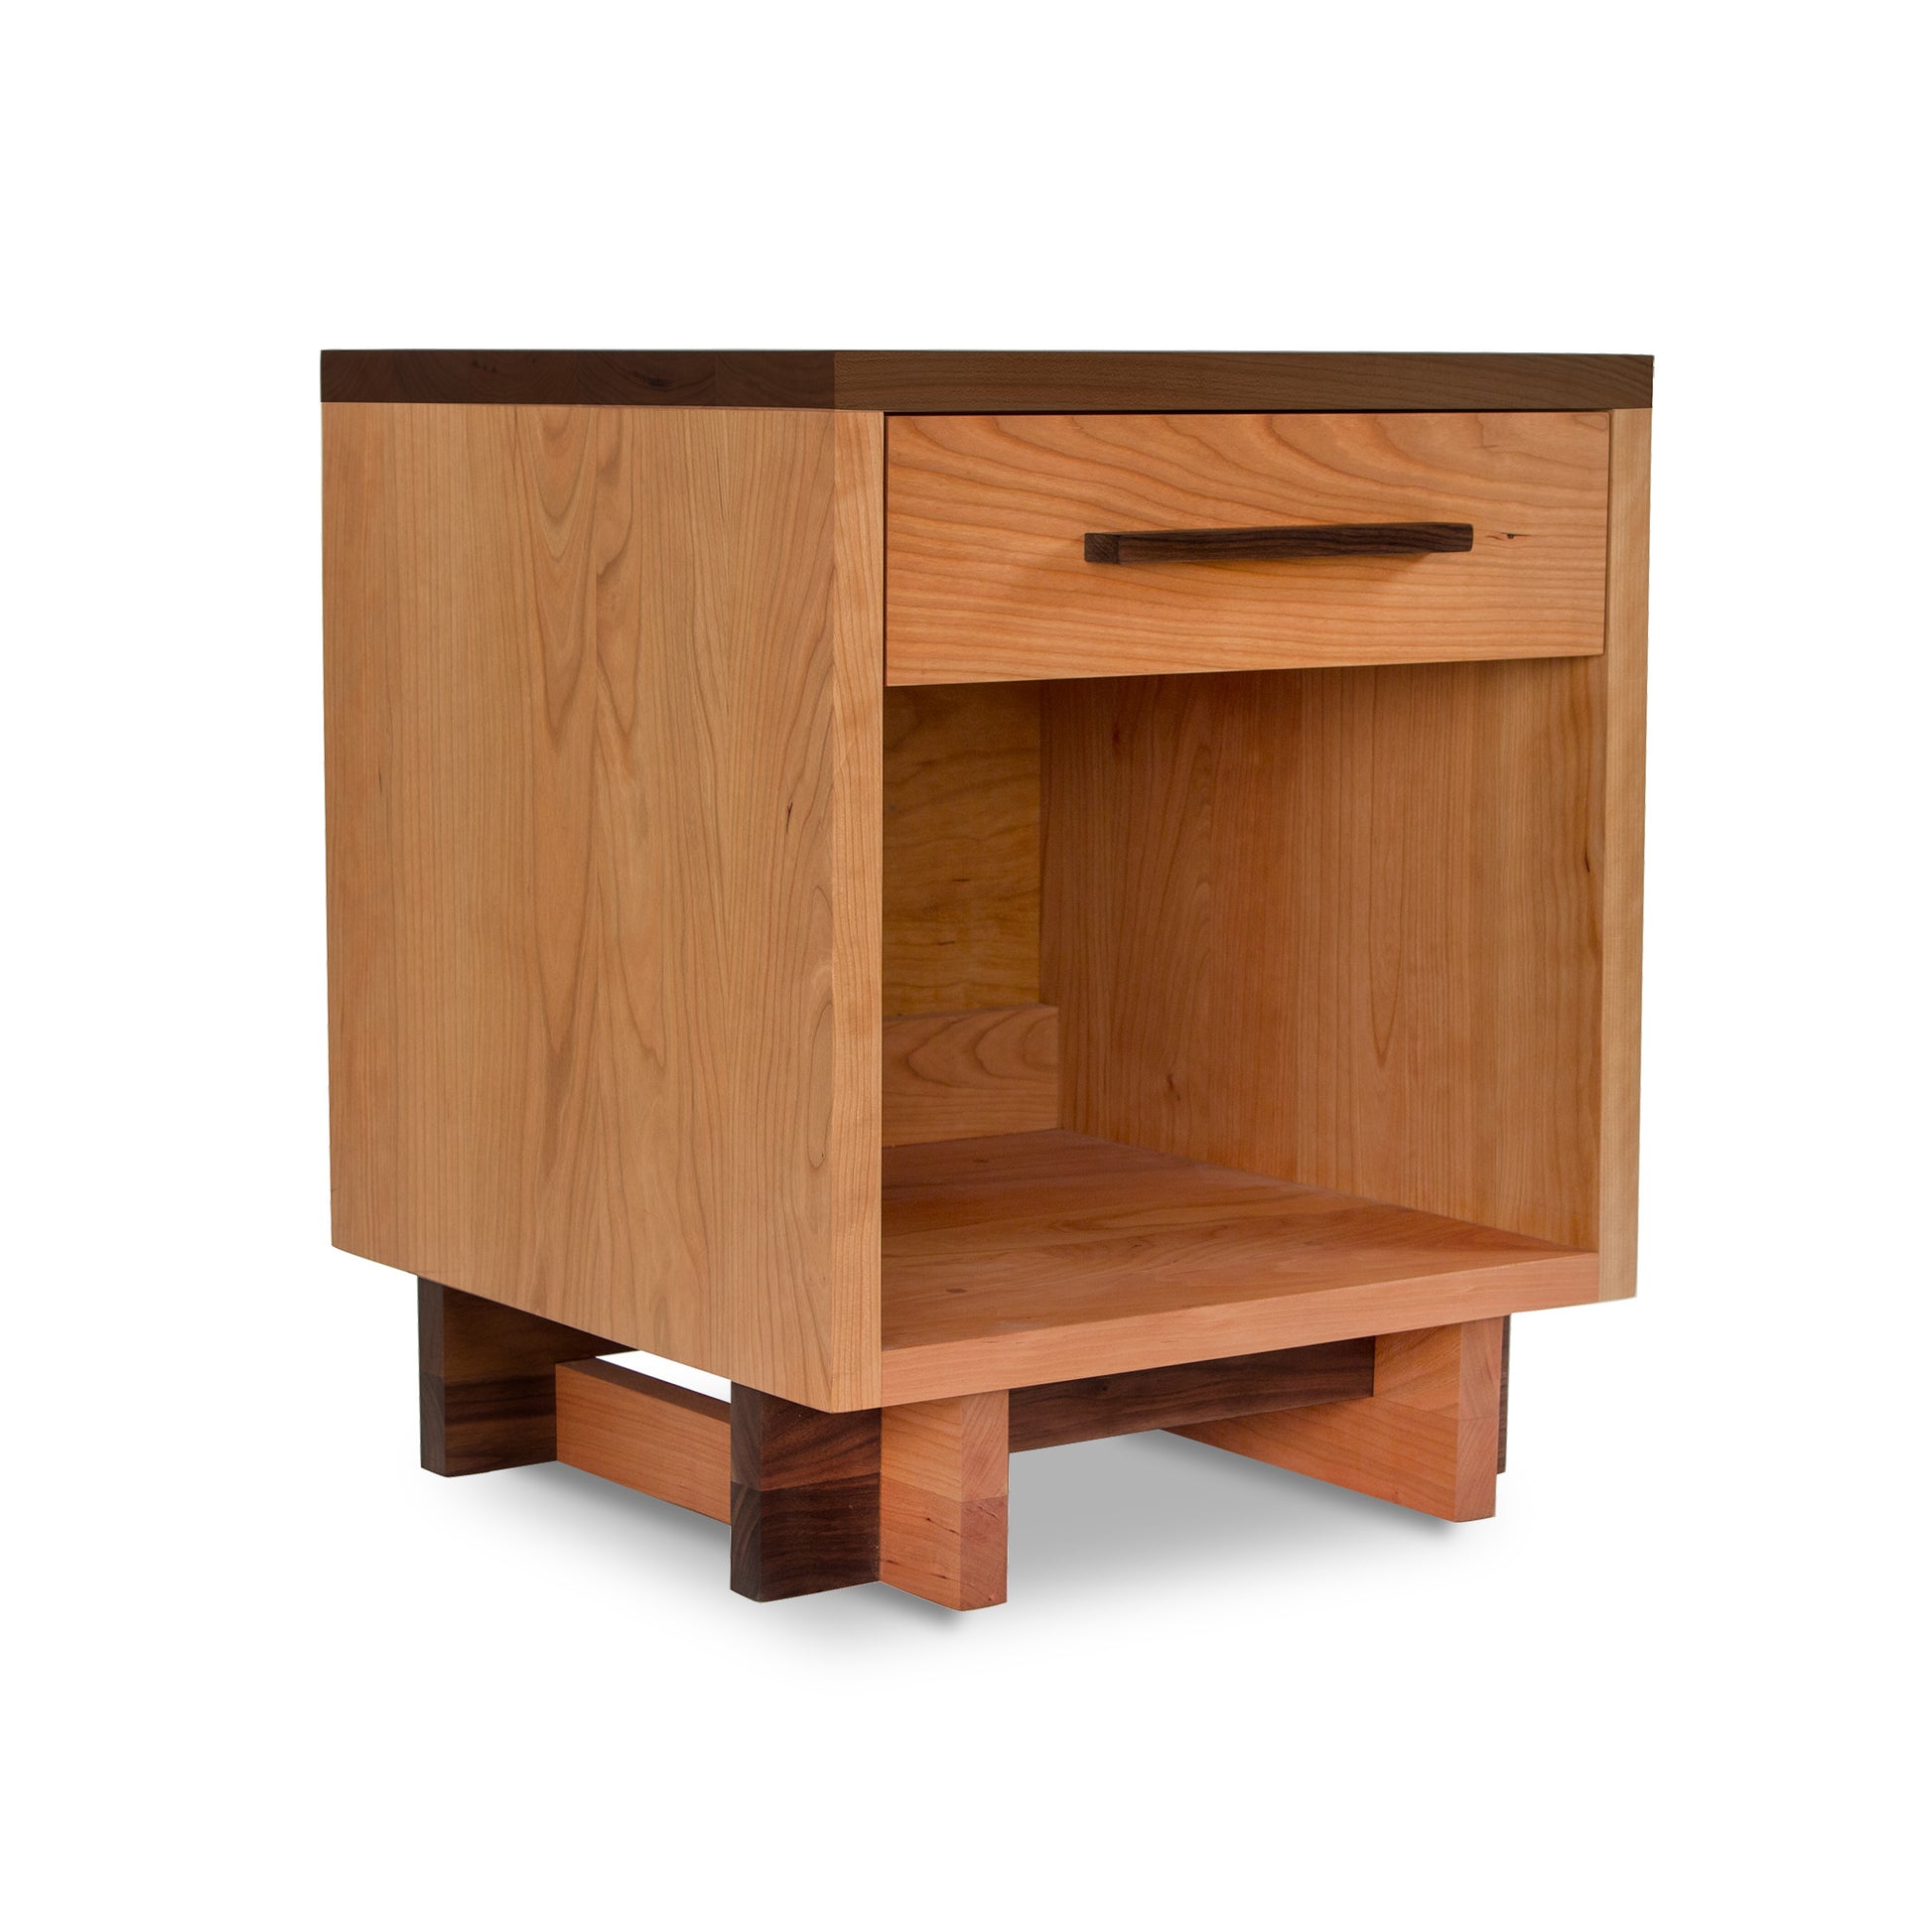 A Modern American 1-Drawer Enclosed Shelf Nightstand with a drawer on top, handmade by Vermont Furniture Designs from solid wood.